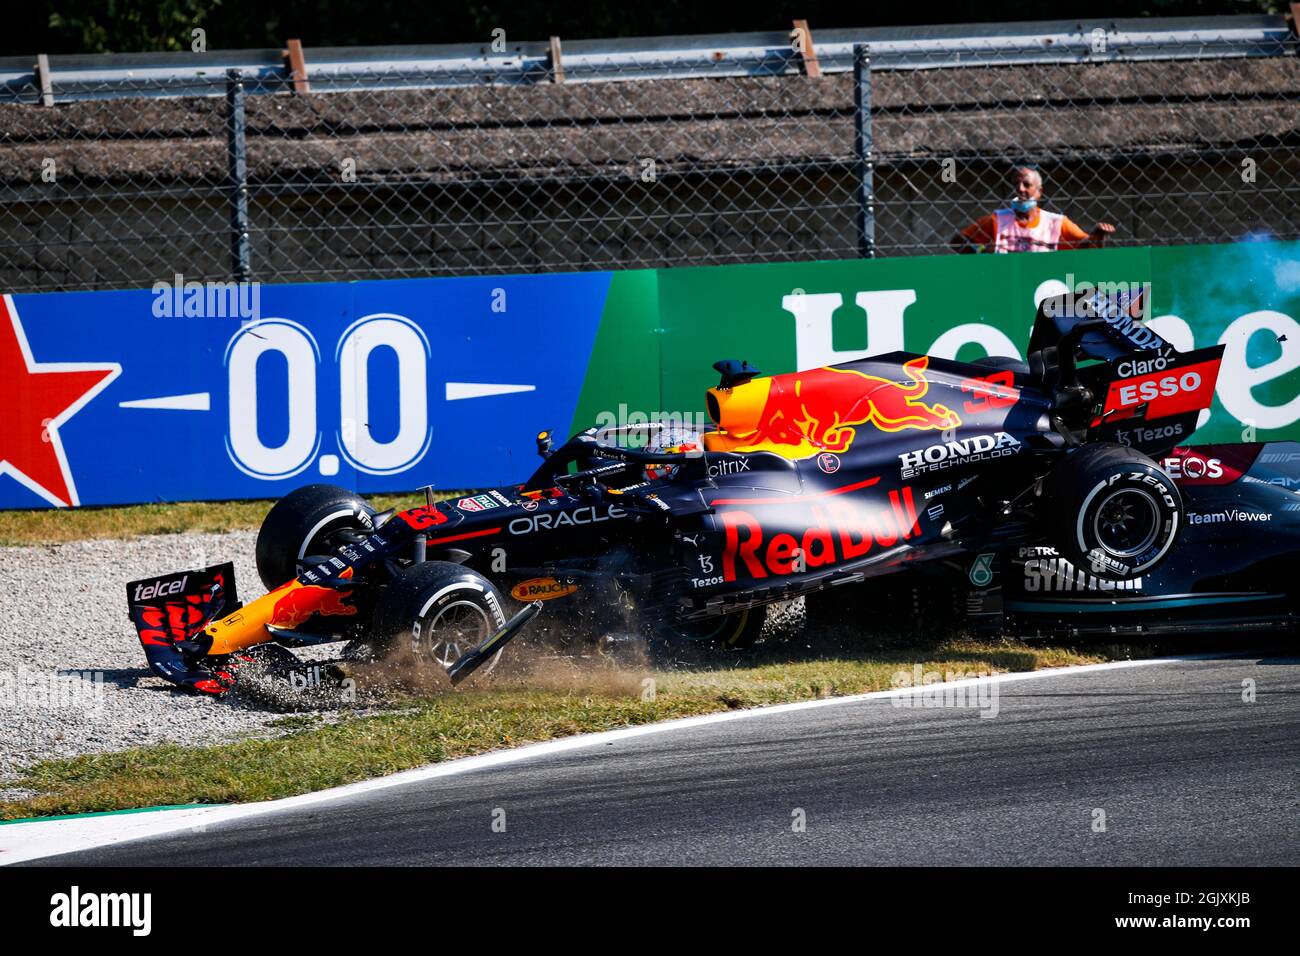 Monza, Italy. 12th Sep, 2021. Monza, Italy. 12th Sep, 2021. Crash between,  33 VERSTAPPEN Max (nld), Red Bull Racing Honda RB16B, 44 HAMILTON Lewis  (gbr), Mercedes AMG F1 GP W12 E Performance,